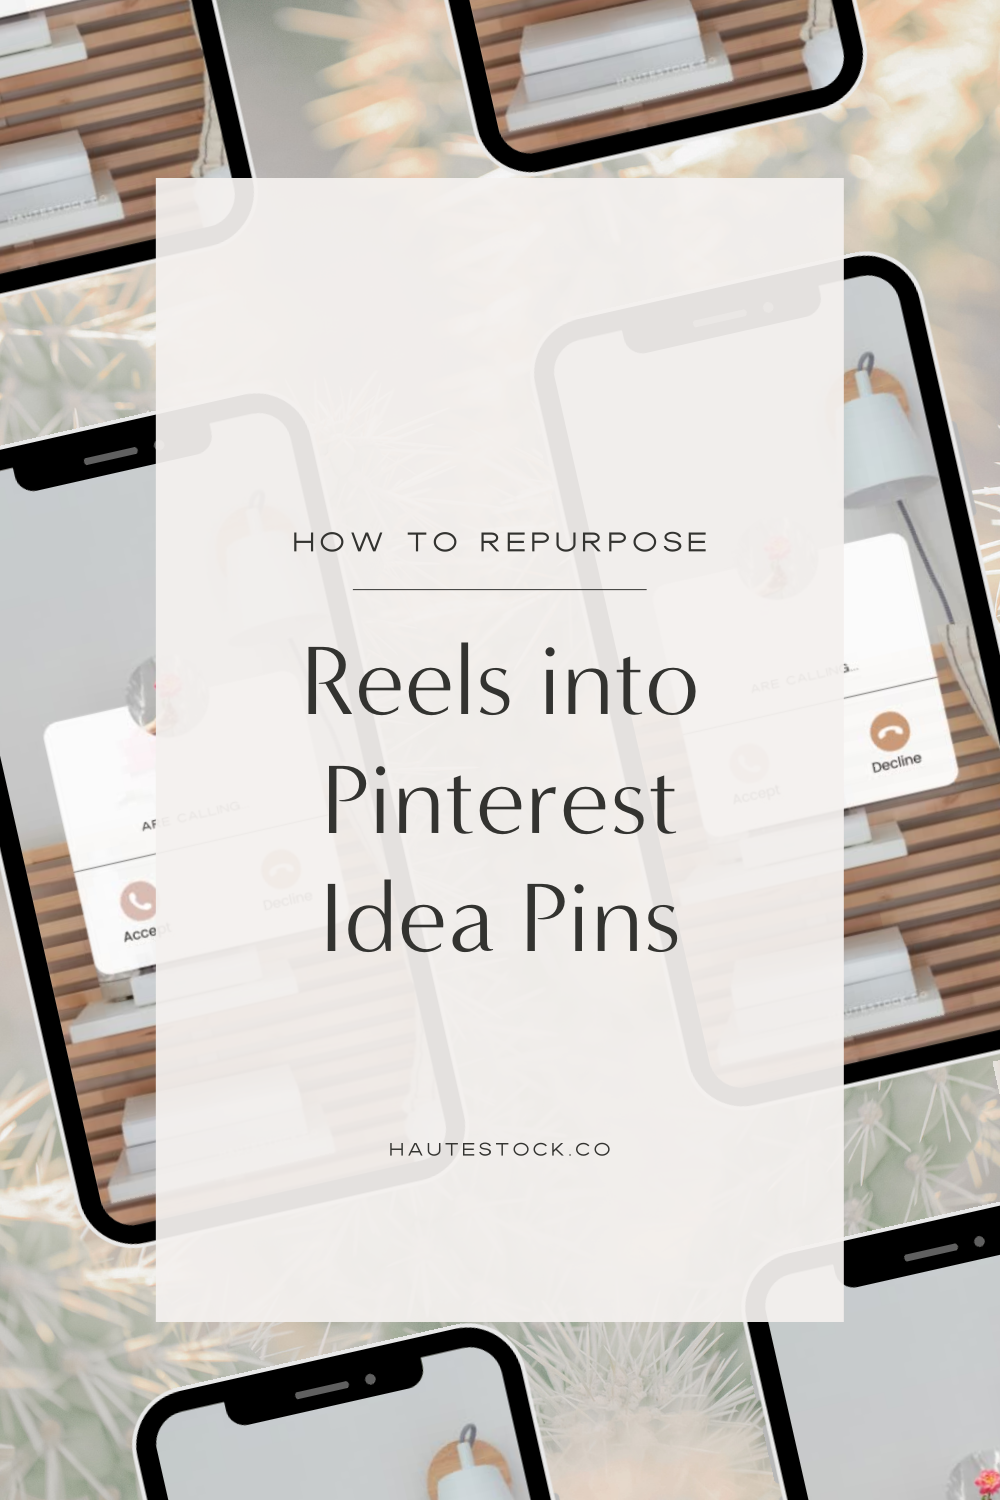 How to Repurpose Reels into Pinterest Idea Pins in Canva